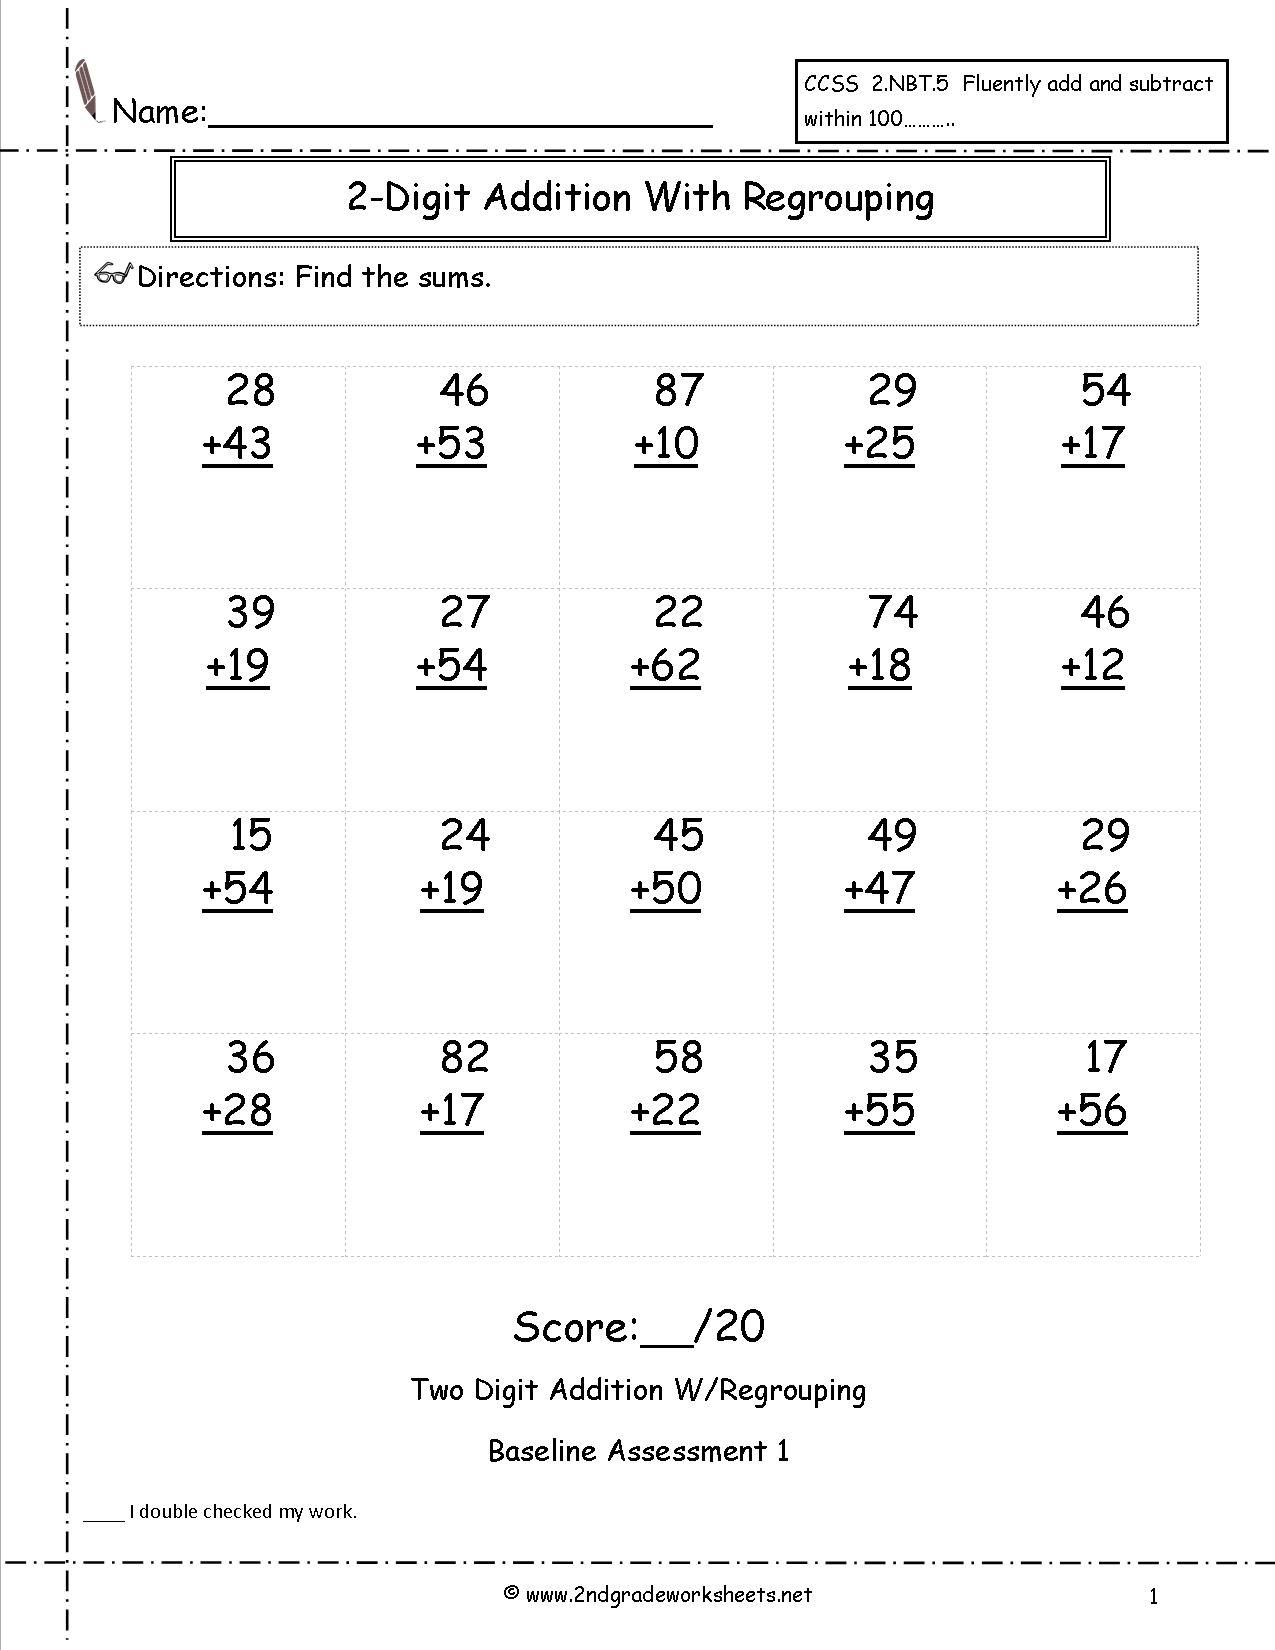 Two Digit Addition With Regrouping Assessment | Love To Learn - Free Printable Double Digit Addition And Subtraction Worksheets